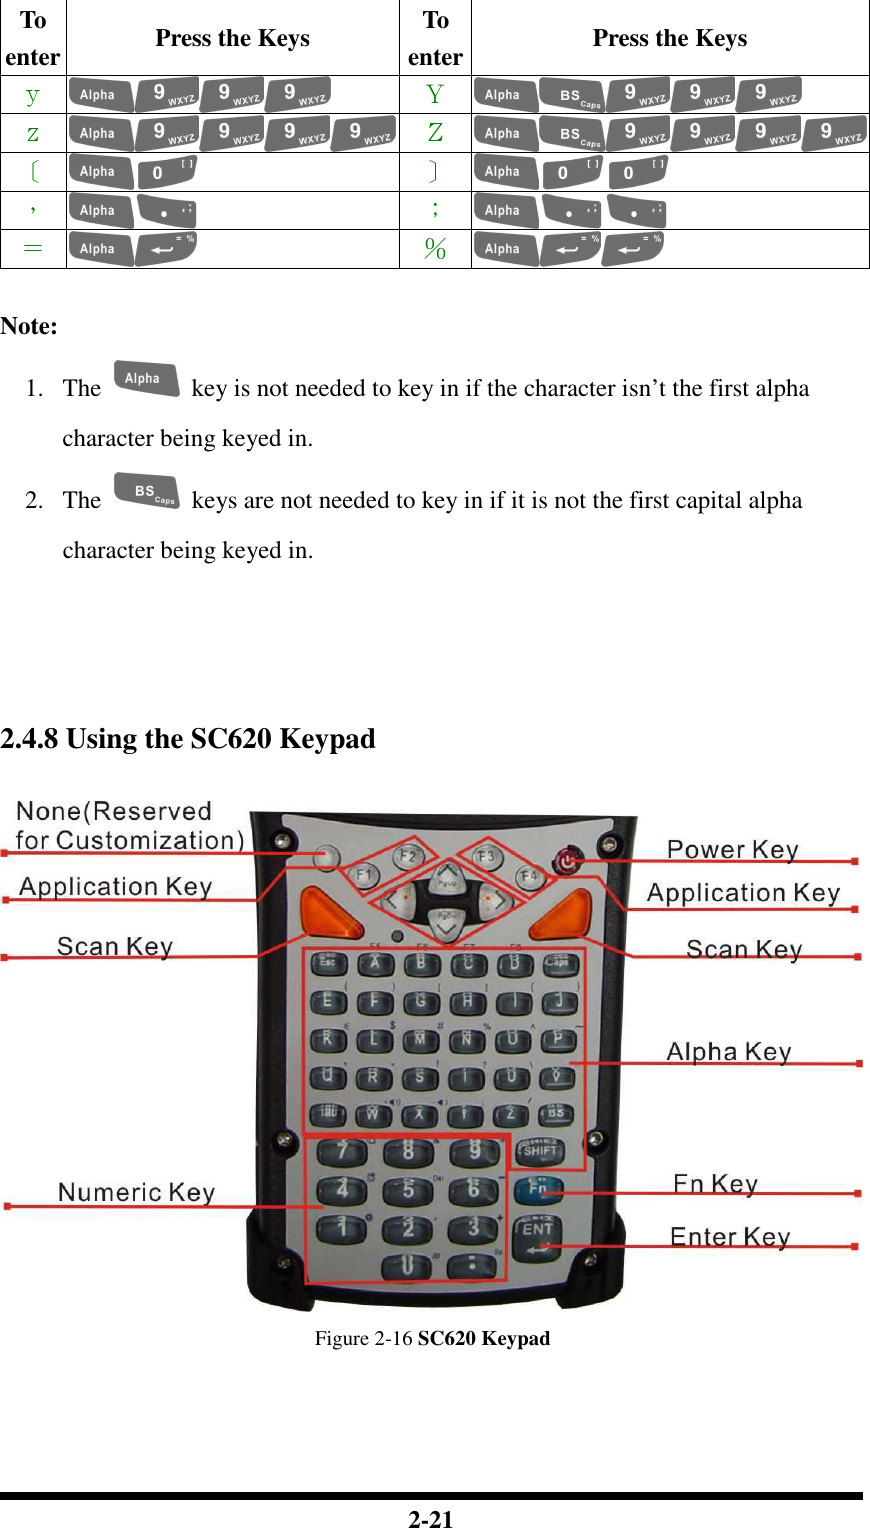  2-21 To enter Press the Keys  To enter Press the Keys ｙ  Ｙ  ｚ  Ｚ  〔  〕  ，  ；  ＝  ％   Note: 1. The    key is not needed to key in if the character isn’t the first alpha character being keyed in. 2. The    keys are not needed to key in if it is not the first capital alpha character being keyed in.     2.4.8 Using the SC620 Keypad   Figure 2-16 SC620 Keypad   